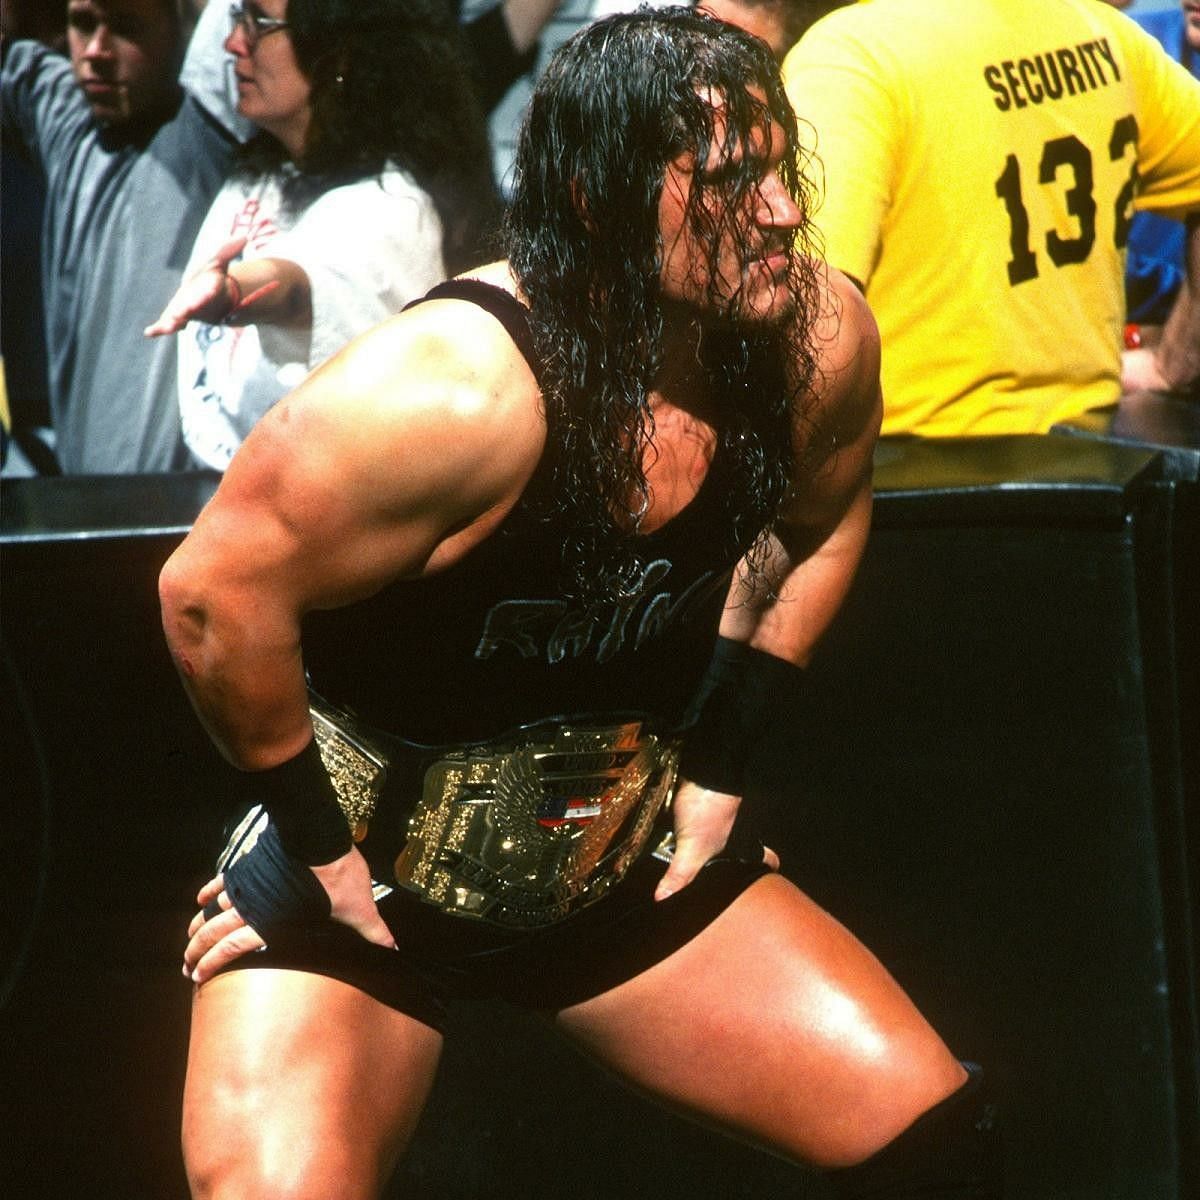 The Man-Beast won the US Championship during the Invasion.